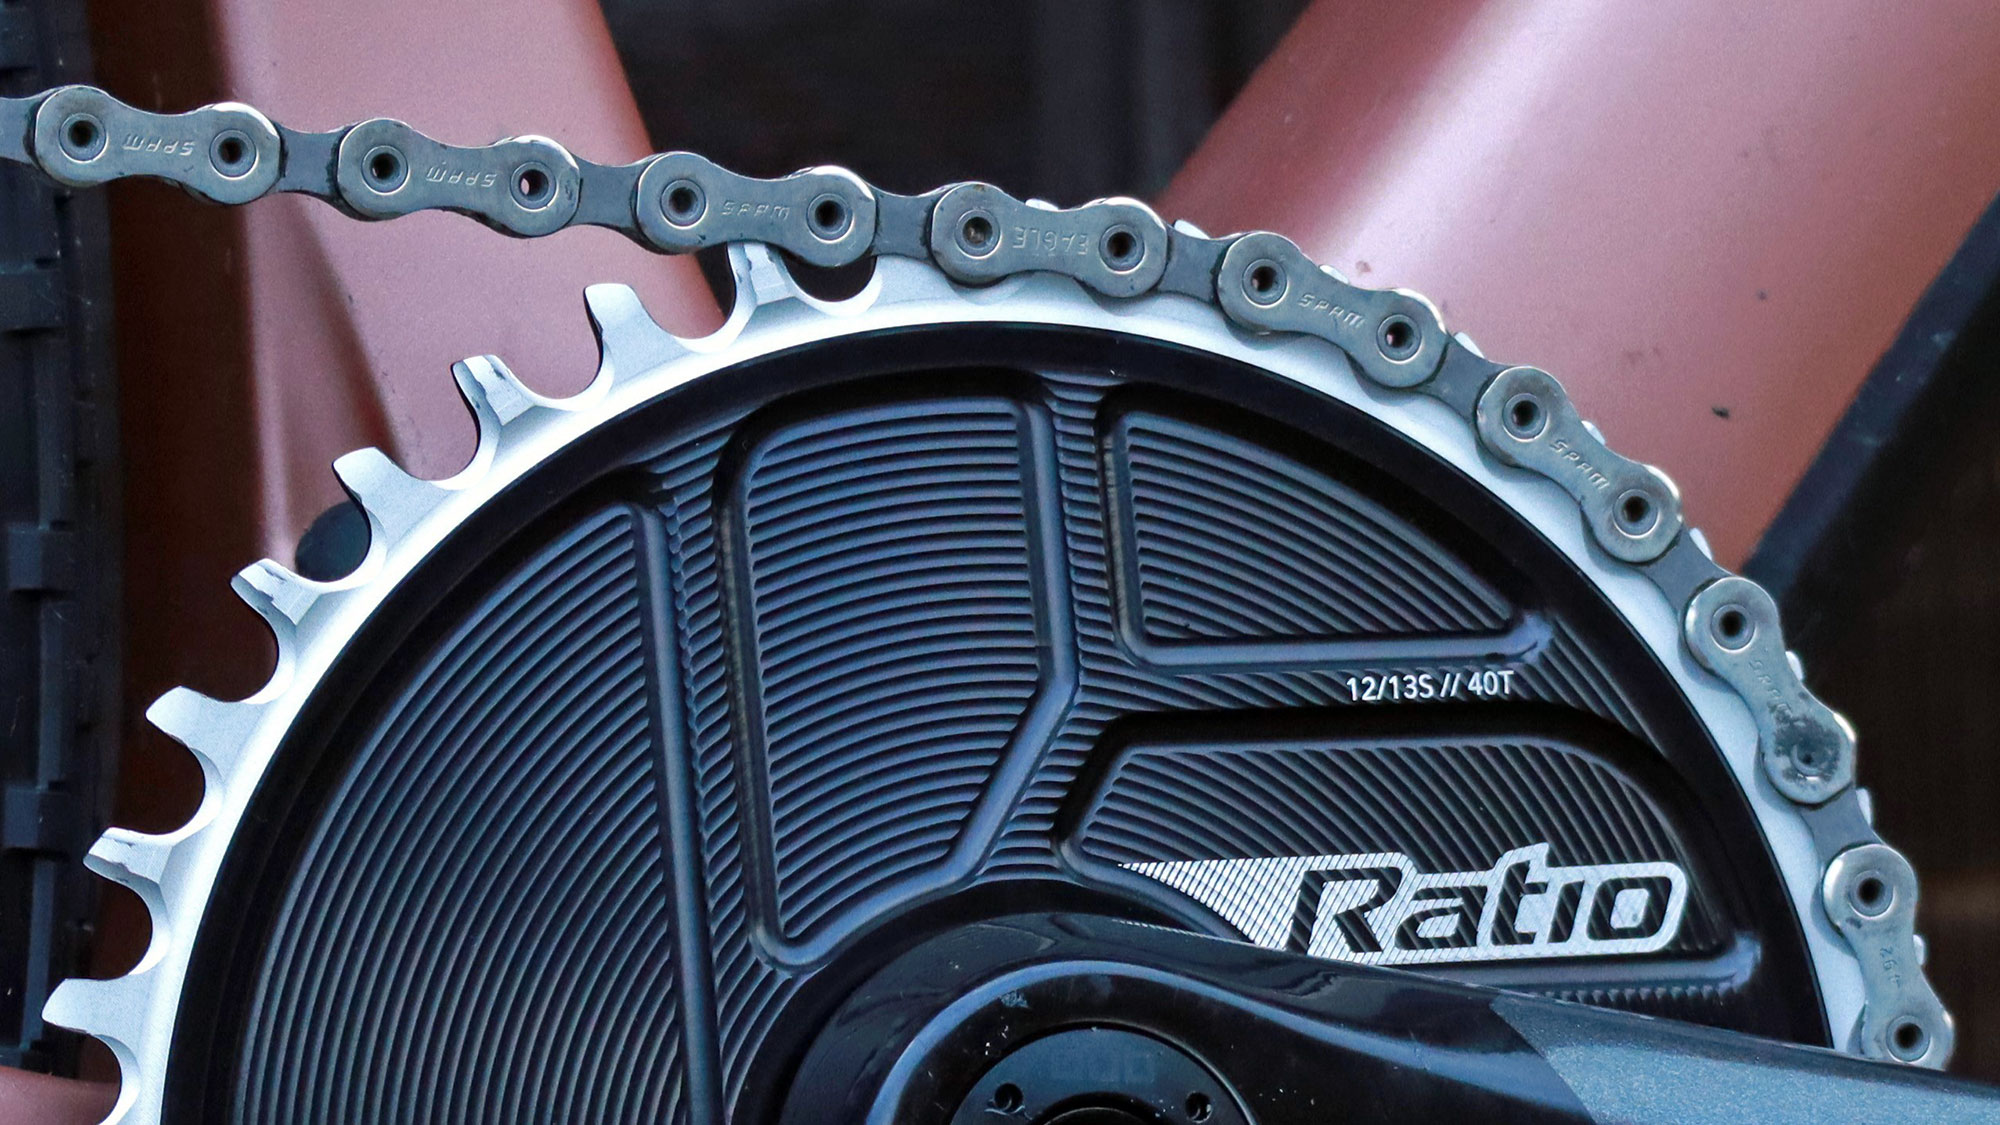 Ratio Direct Mount chainrings, spiderless aero 1x DM rings for 12 and 13-speed, new universal tooth profile